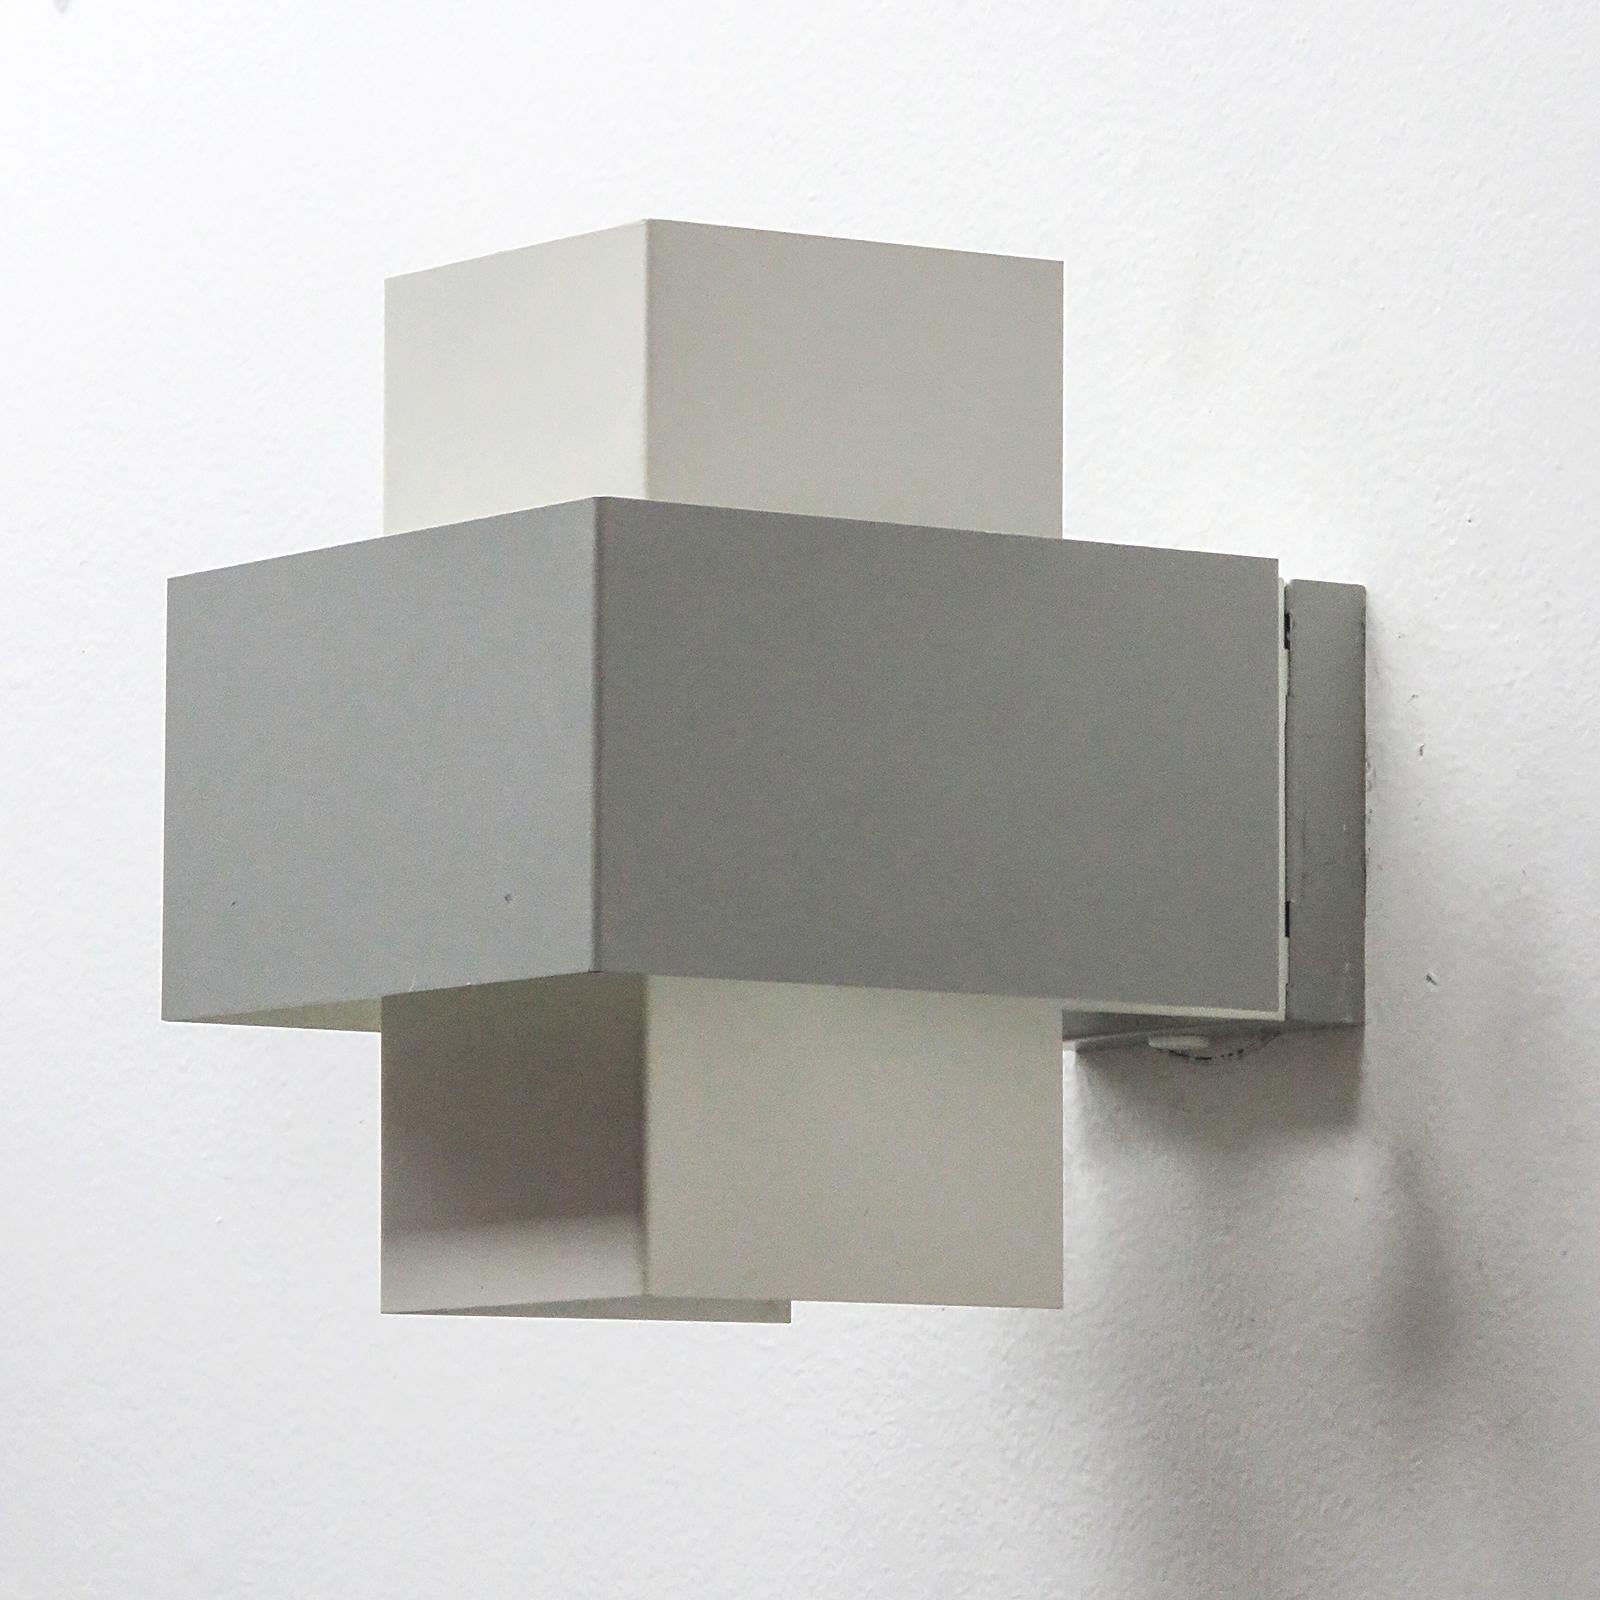 Elegant pair of geometric wall lights by Philips, Netherlands, 1960s, in light grey and white enameled metal, marked. One E26 socket per fixture, max. wattage 75w each, wired for US standards, bulbs provided as a onetime courtesy. Priced as a set of